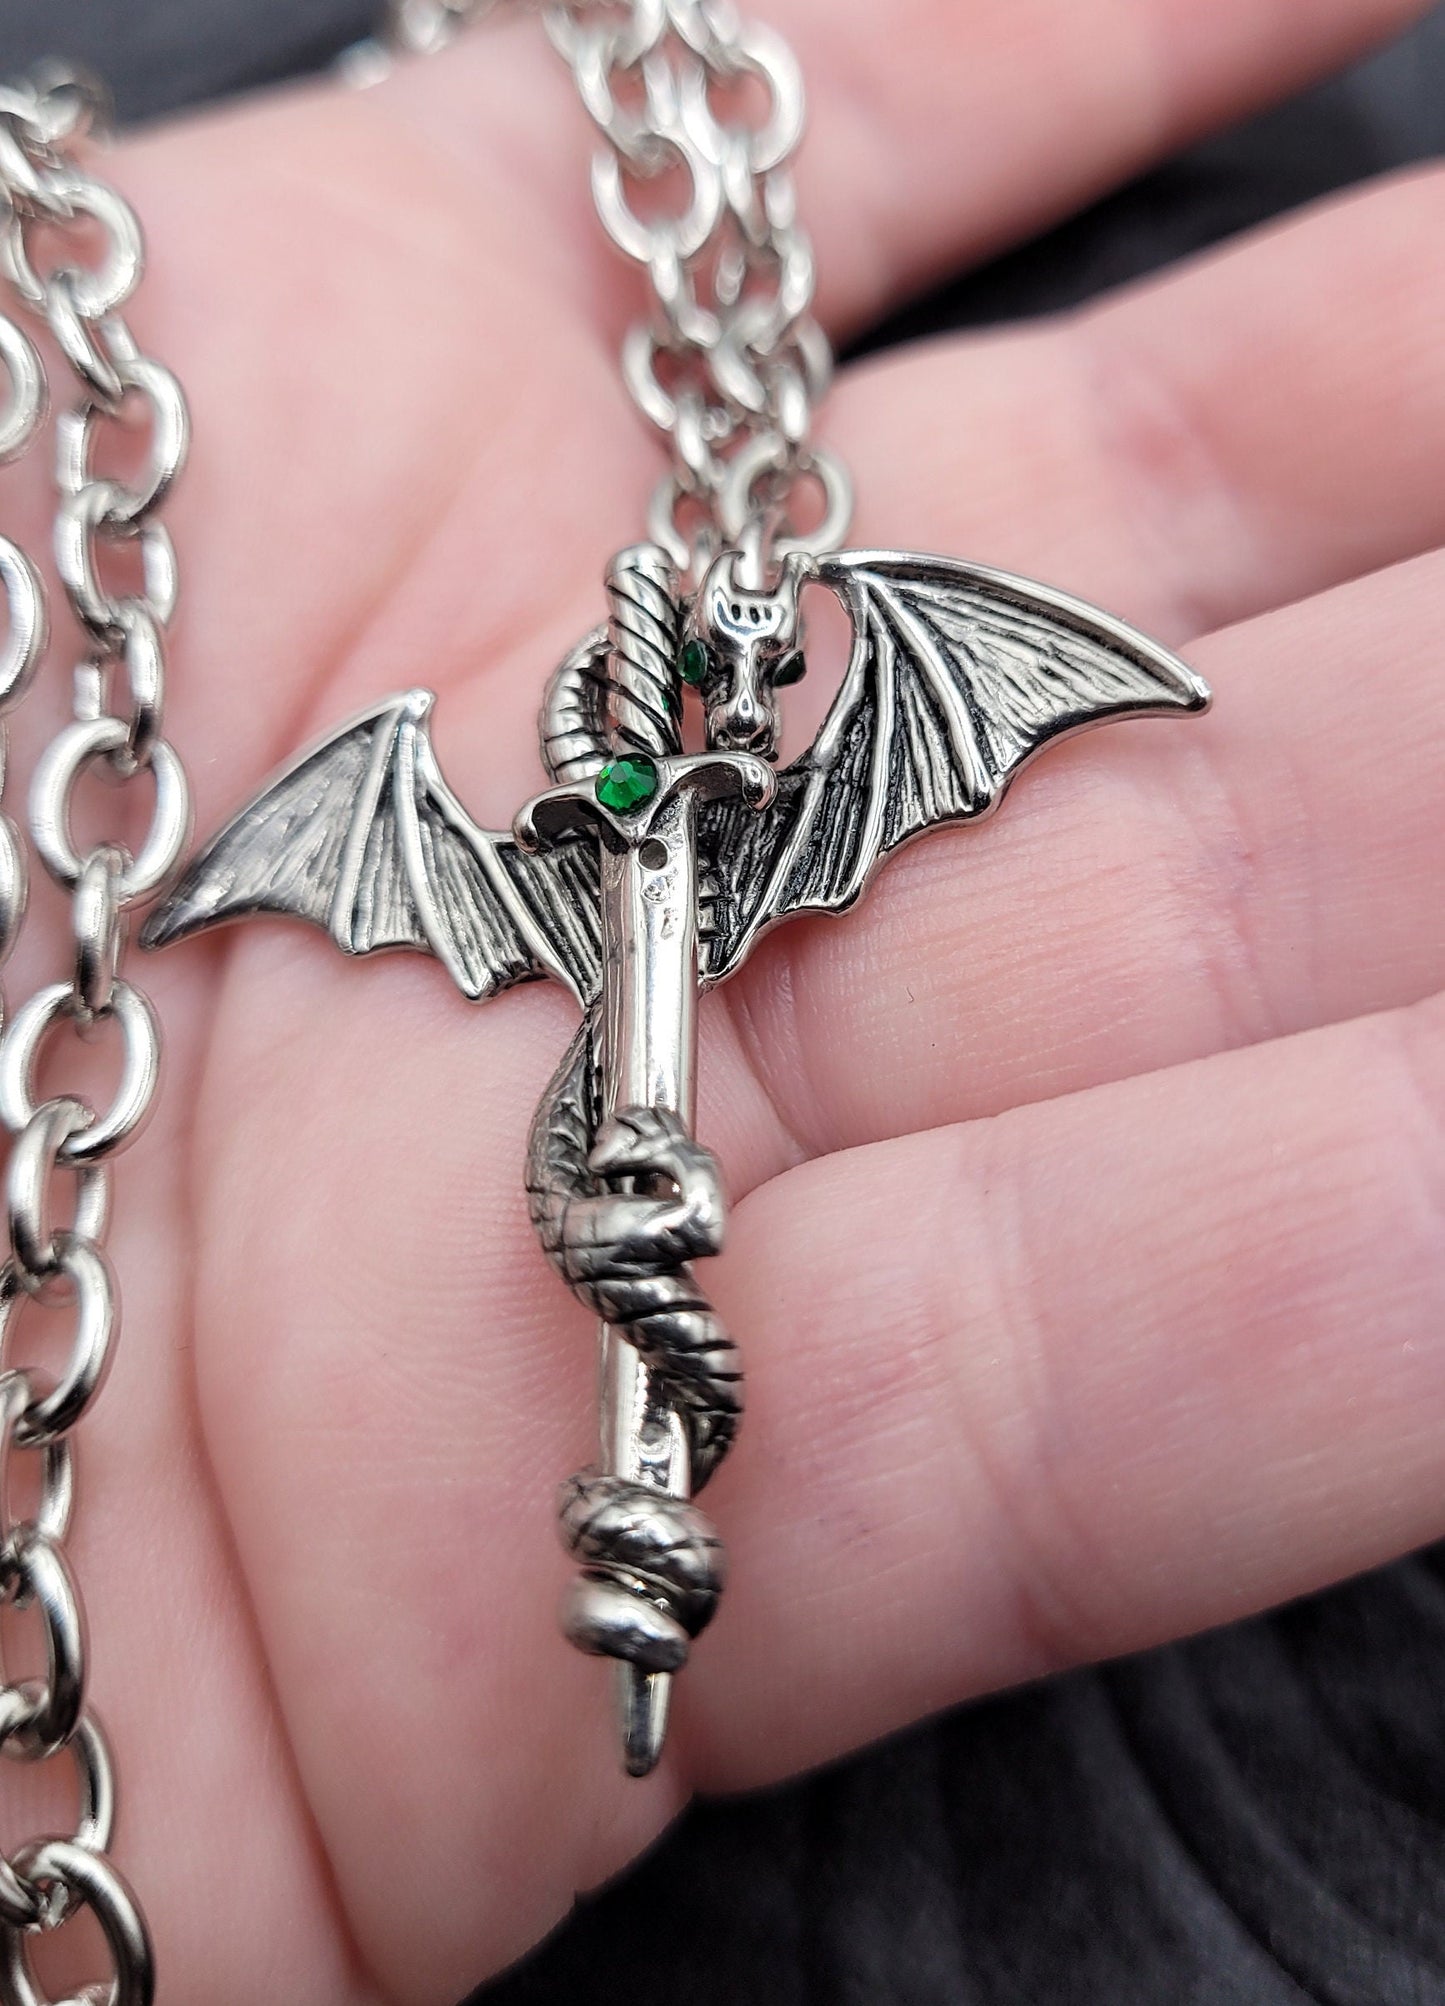 Silver Dragon and Sword Fantasy RPG Necklace with Stainless Steel Chain